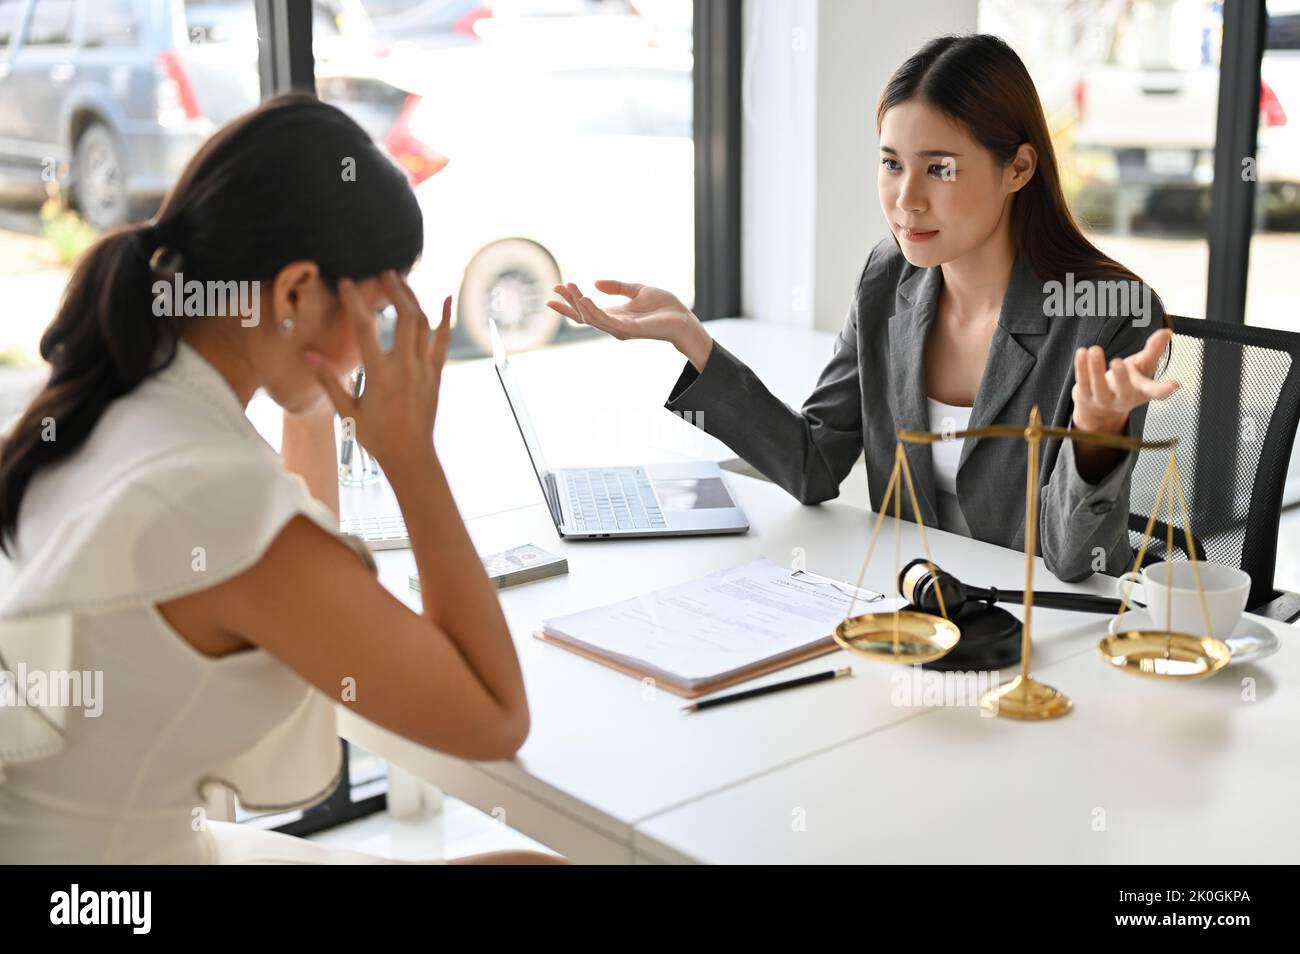 Serious and stressed Asian female client meets with her personal lawyer to discuss and finalize the plan for her lawsuit. Stock Photo